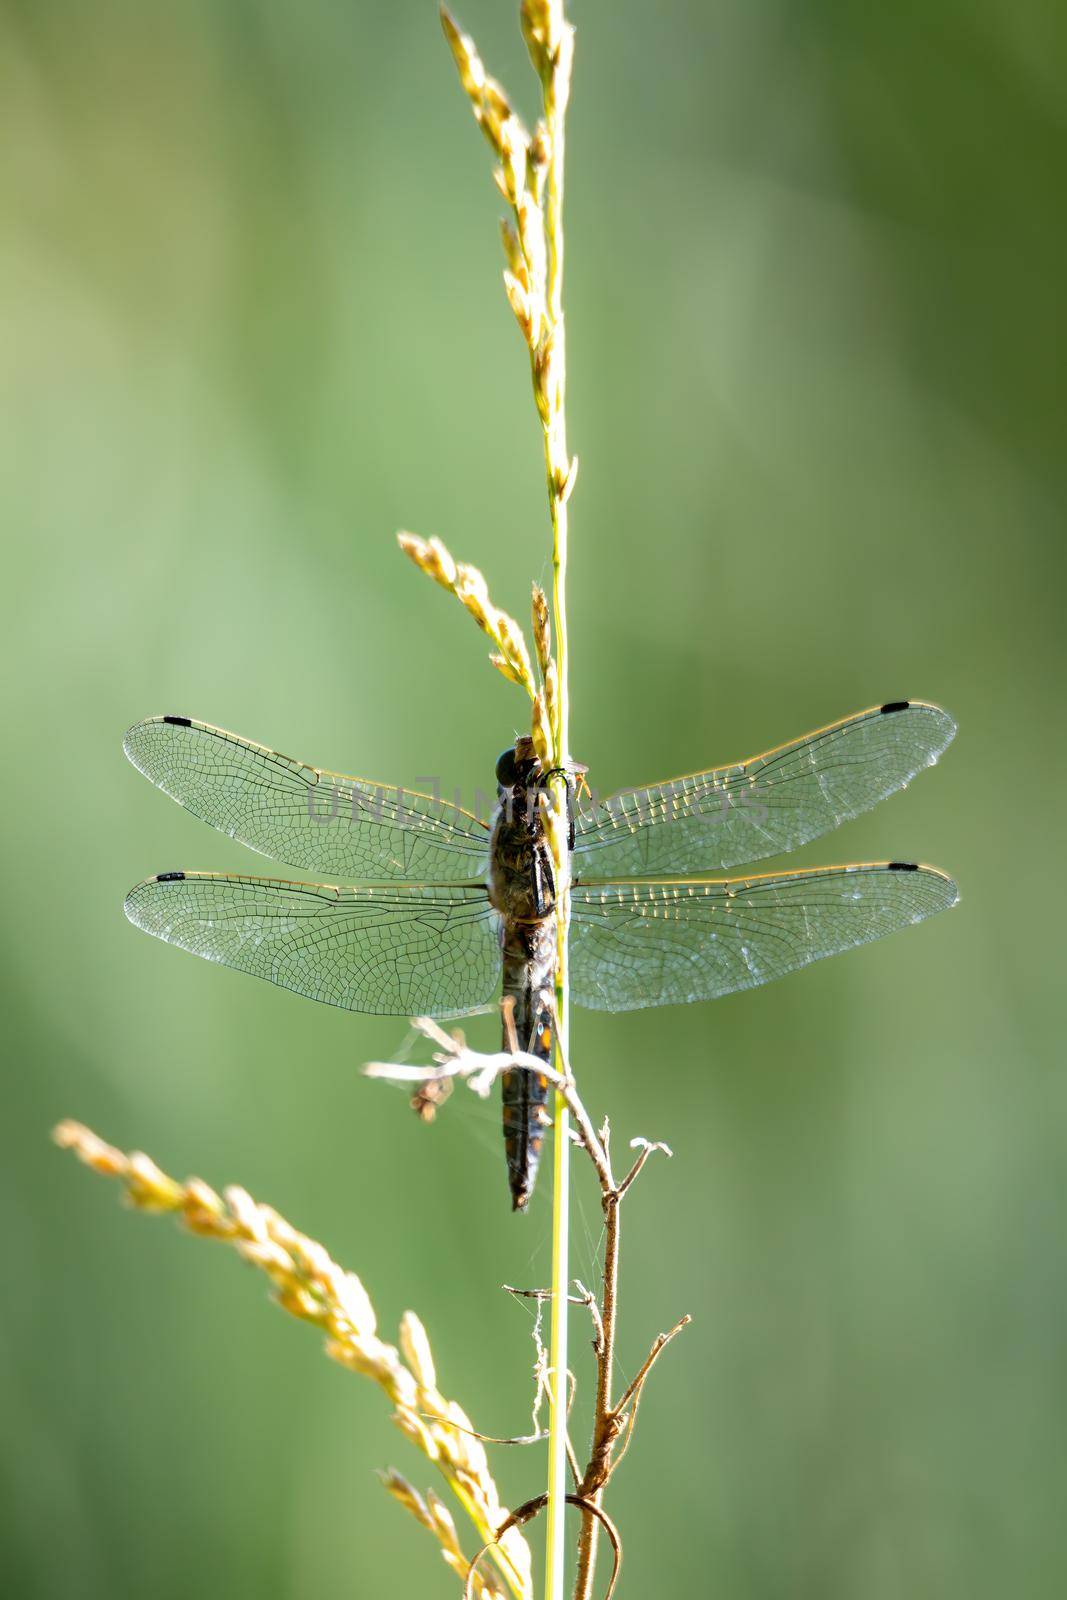 Big dragonfly, flying predatory insect belonging to the order Odonata. Dragon fly resting on grass near summer pond. Europe, Czech republic wildlife